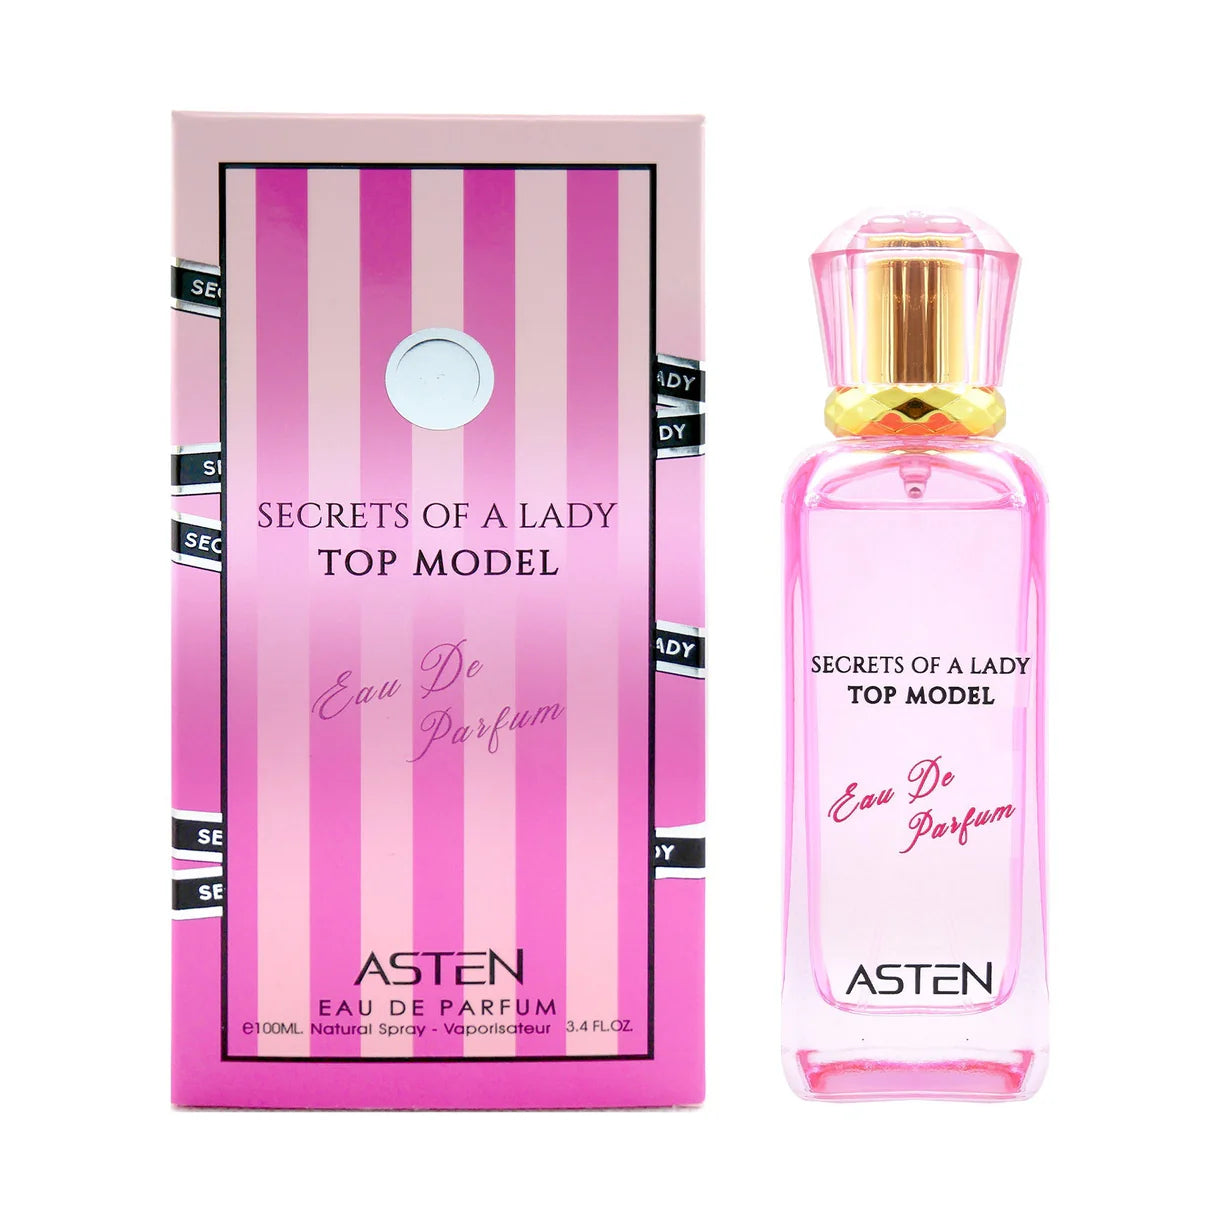 Secrets of a Lady Top Model EDP - 100Ml (3.4Oz) By Asten para mujeres ( Bombashell -Victoria secrets)